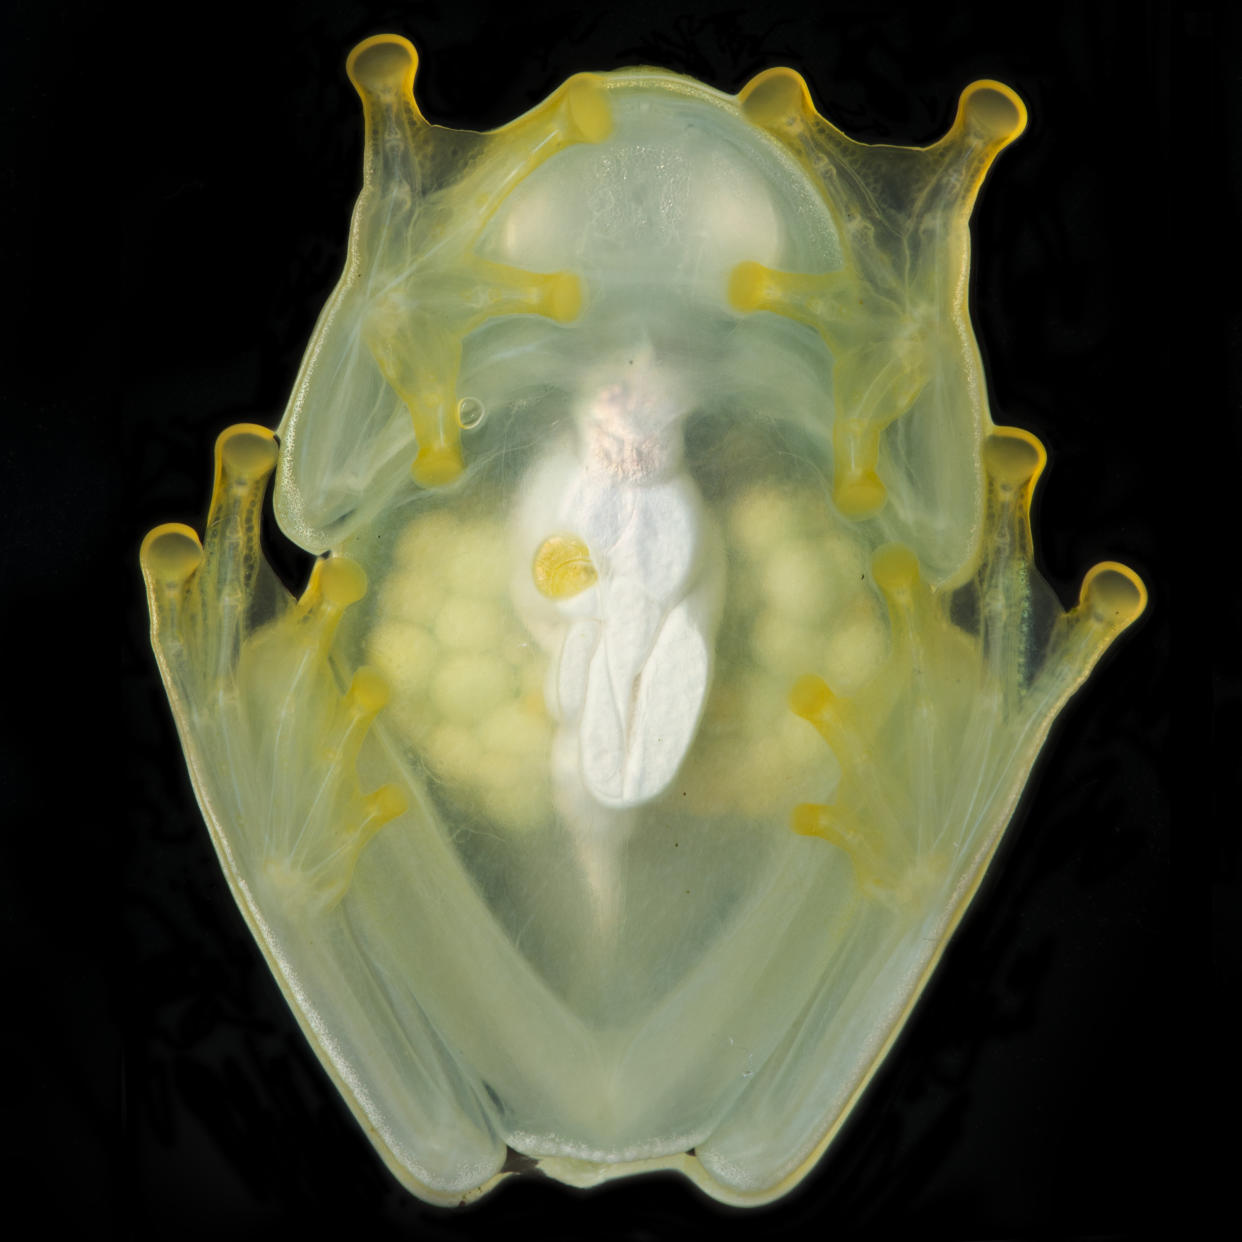 This photo provided by researchers in December 2022 shows a female glass frog with eggs in her transparent ovaries, photographed from below using a flash. Some frogs found in South and Central America have the rare ability to turn on and off their nearly transparent appearance, researchers report Thursday, Dec. 22, 2022, in the journal Science. (Jesse Delia/AMNH via AP)